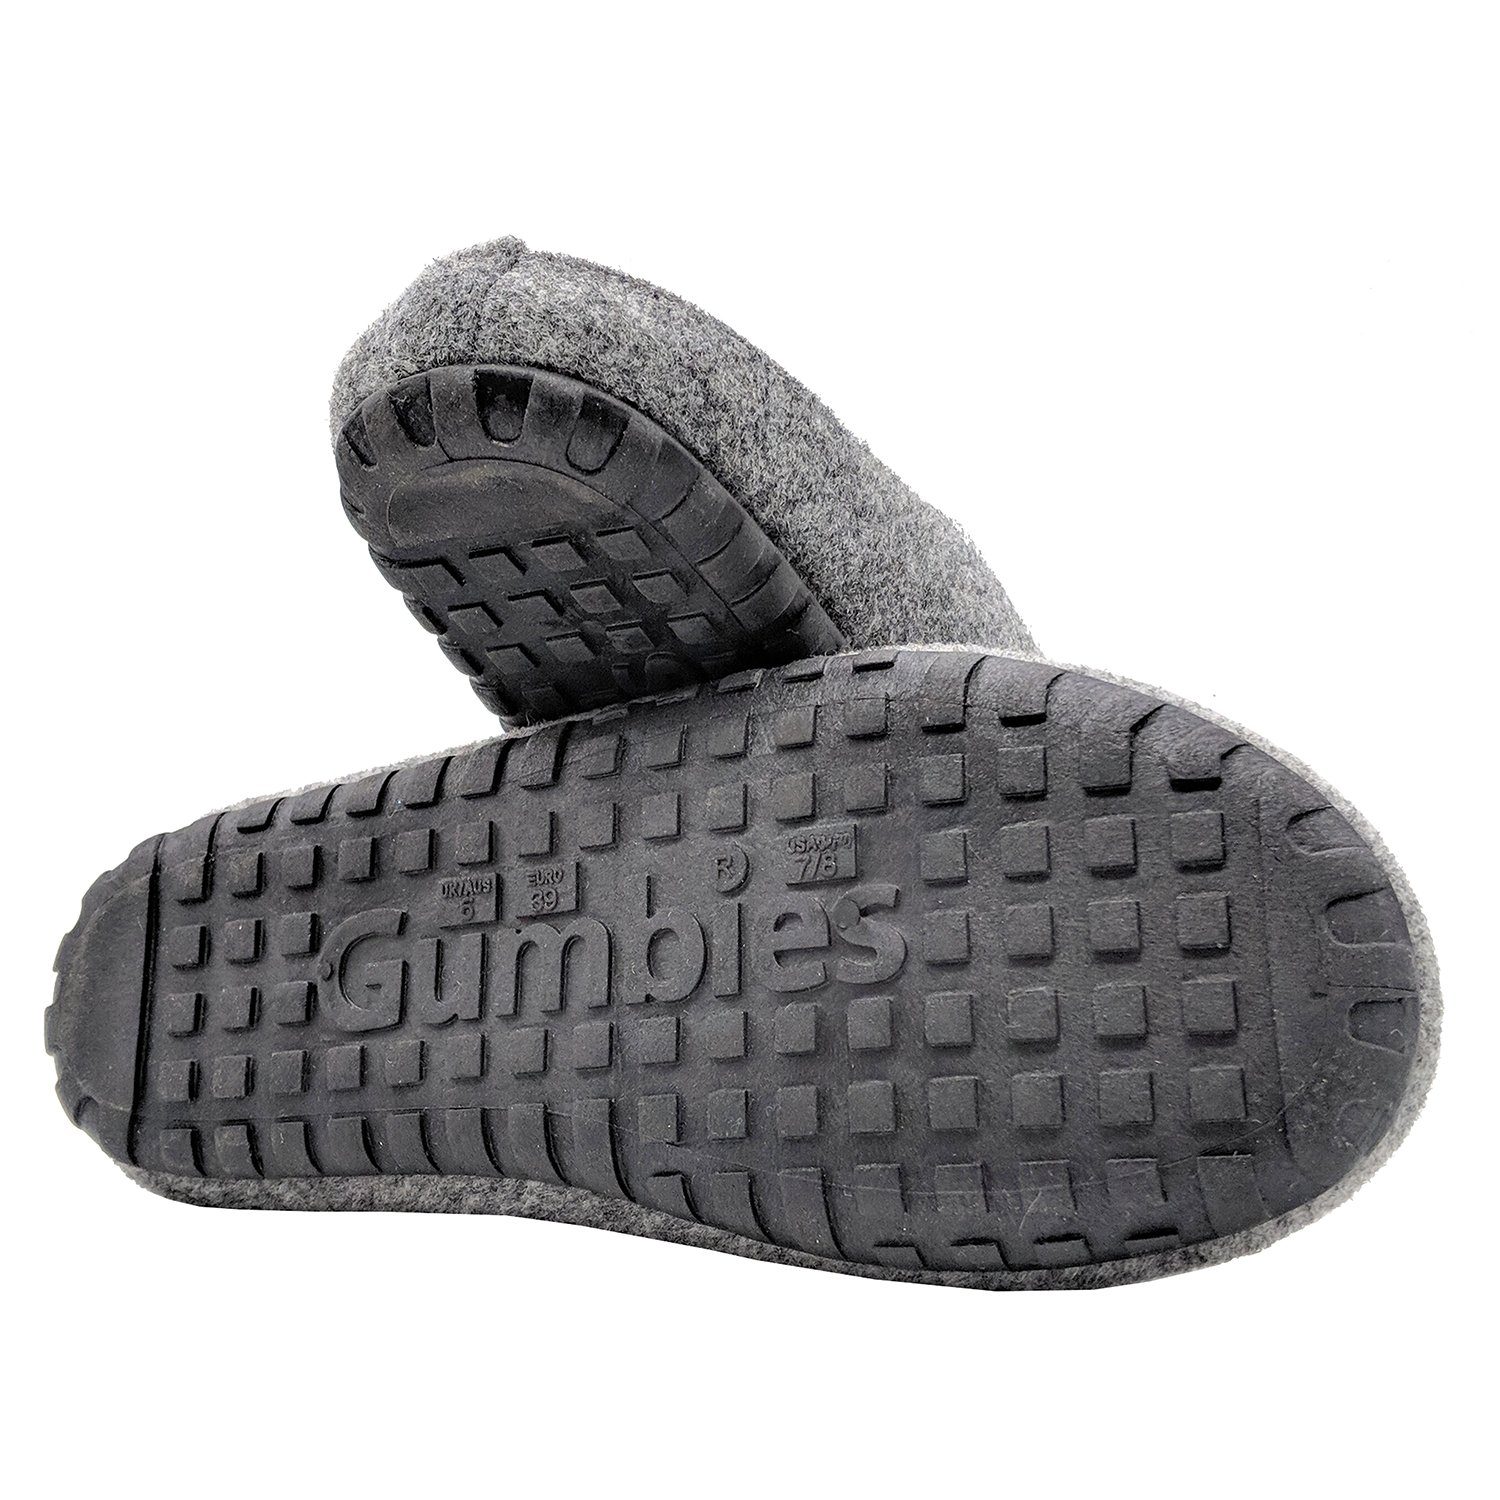 Materialien aus Hausschuh farbenfrohen in Gumbies recycelten Outback »in Grey-Curry Slipper Designs«